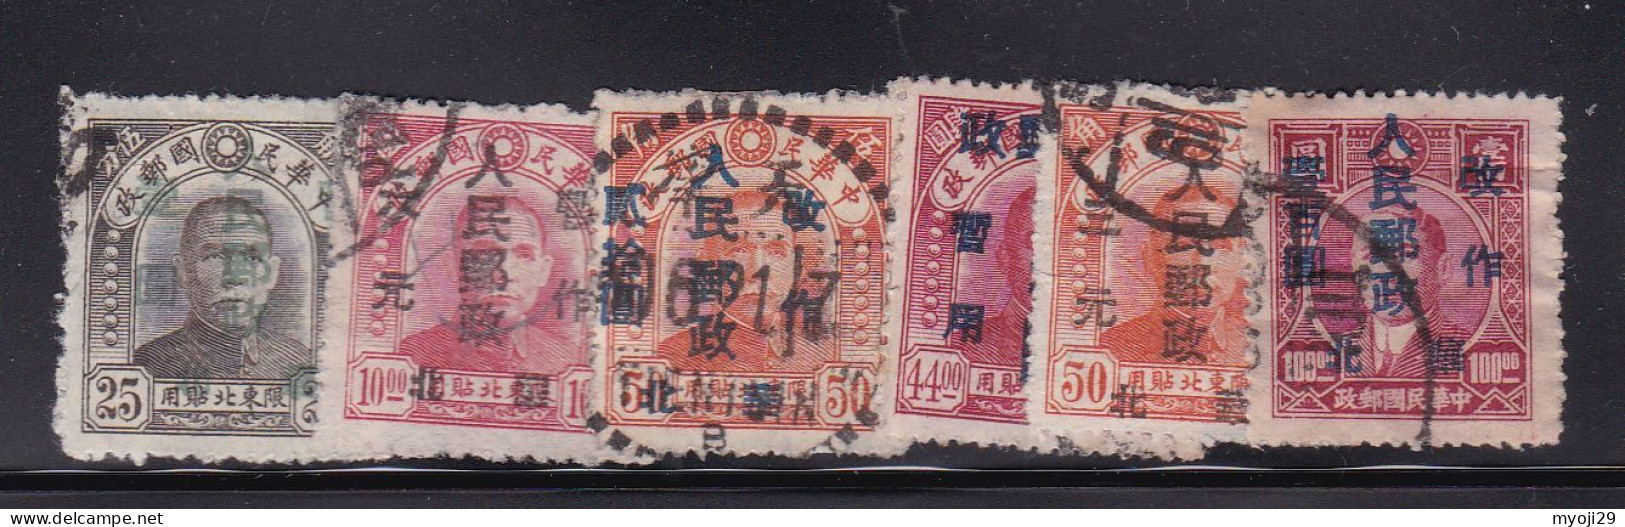 China 1949 Surch "People' Post" Used Lots .various - Gebraucht